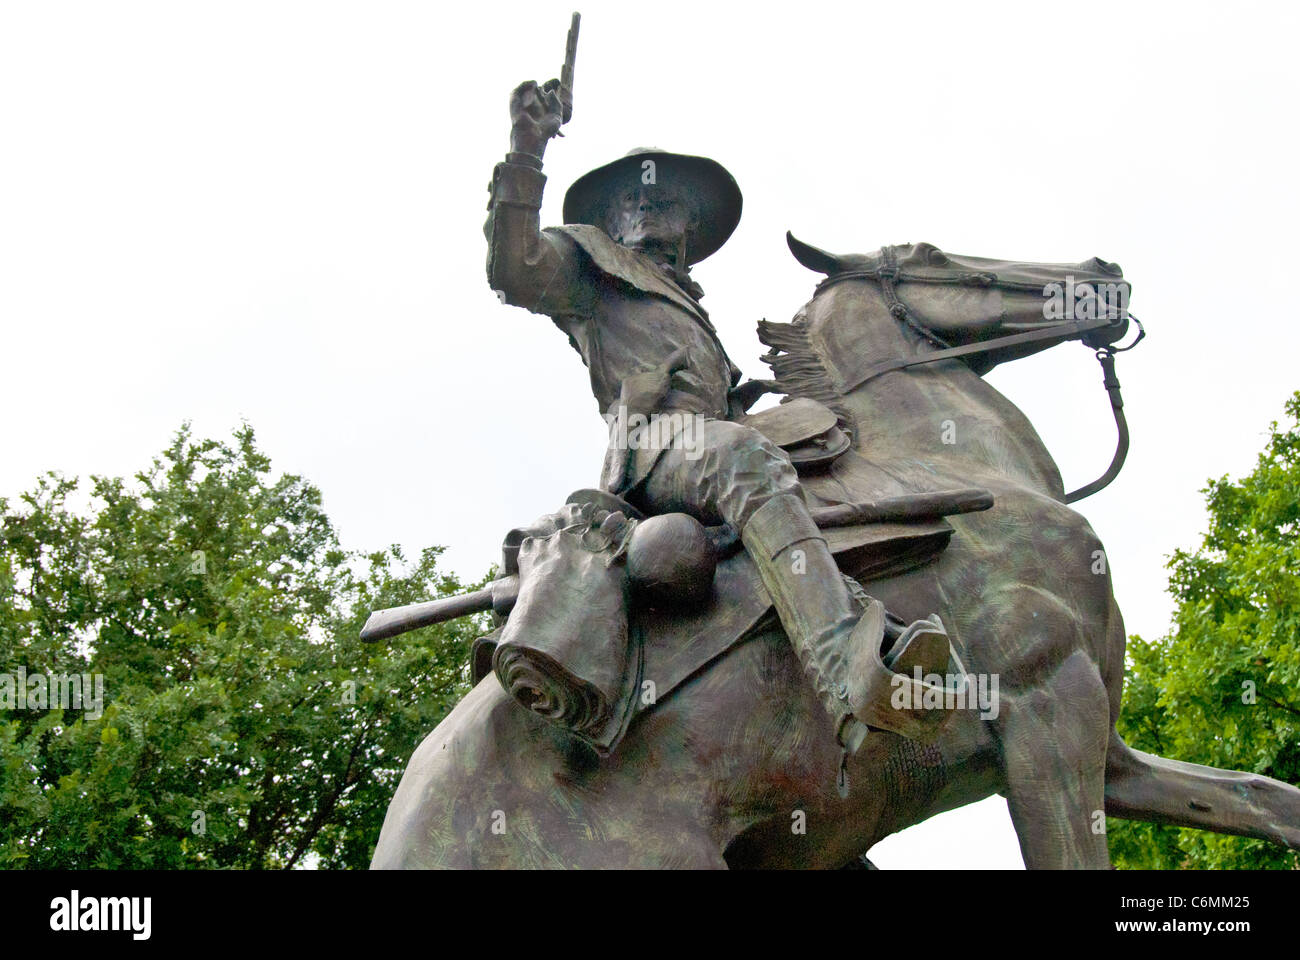 Texas Ranger Captain John Coffee 'Jack' Hays (1817-1883) statue on the Hays County Courthouse grounds in San Marcos, Texas Stock Photo